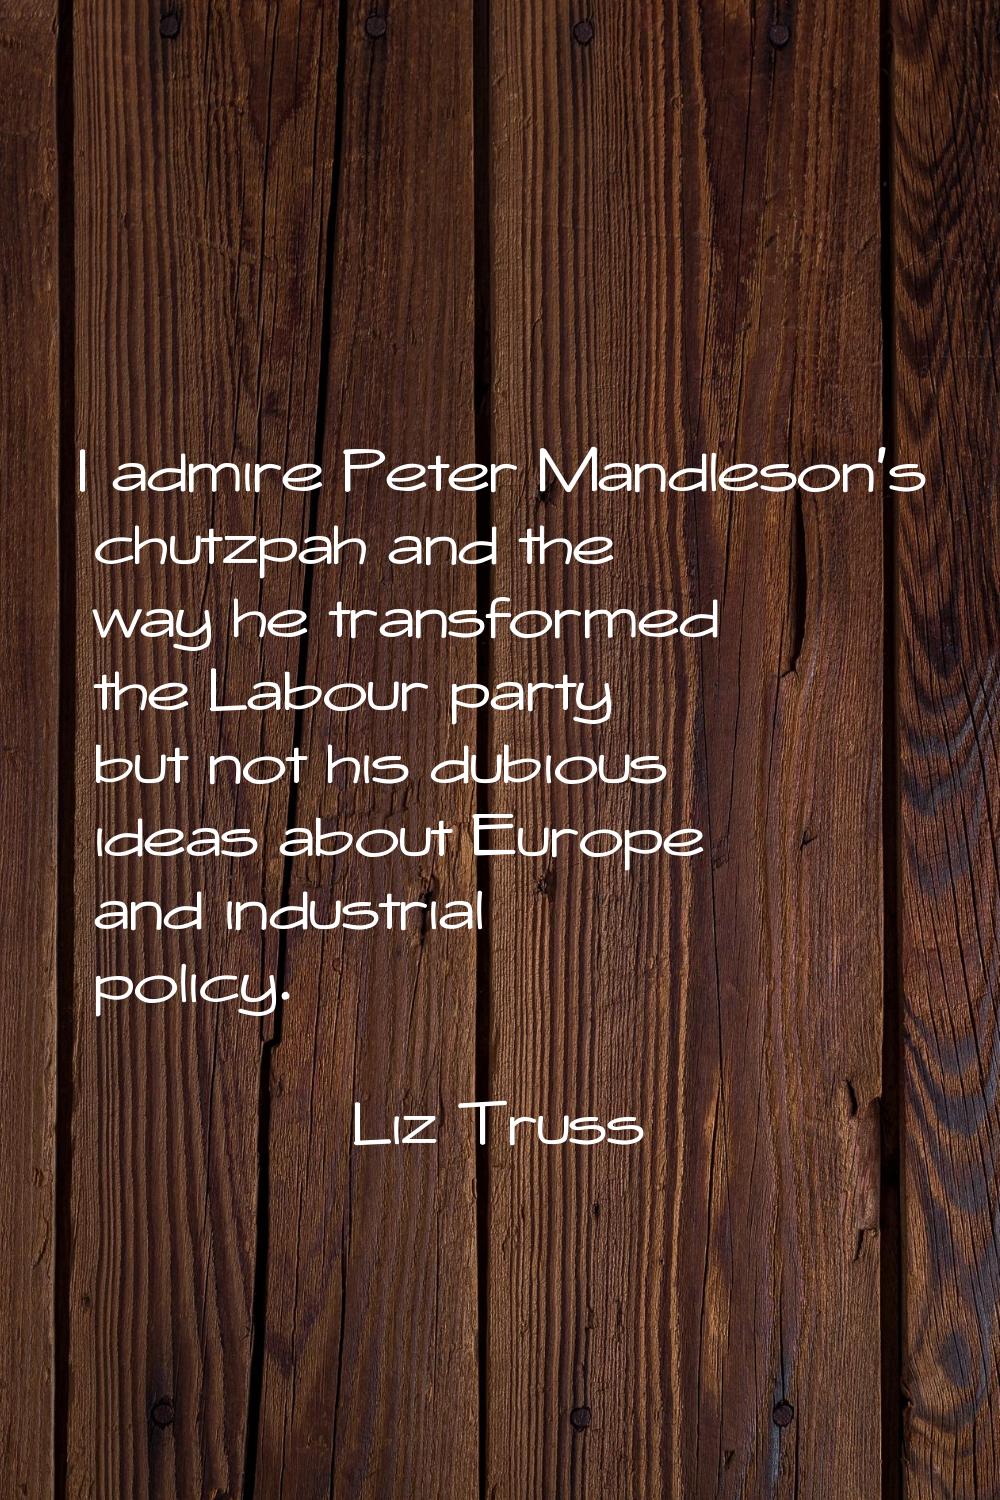 I admire Peter Mandleson's chutzpah and the way he transformed the Labour party but not his dubious